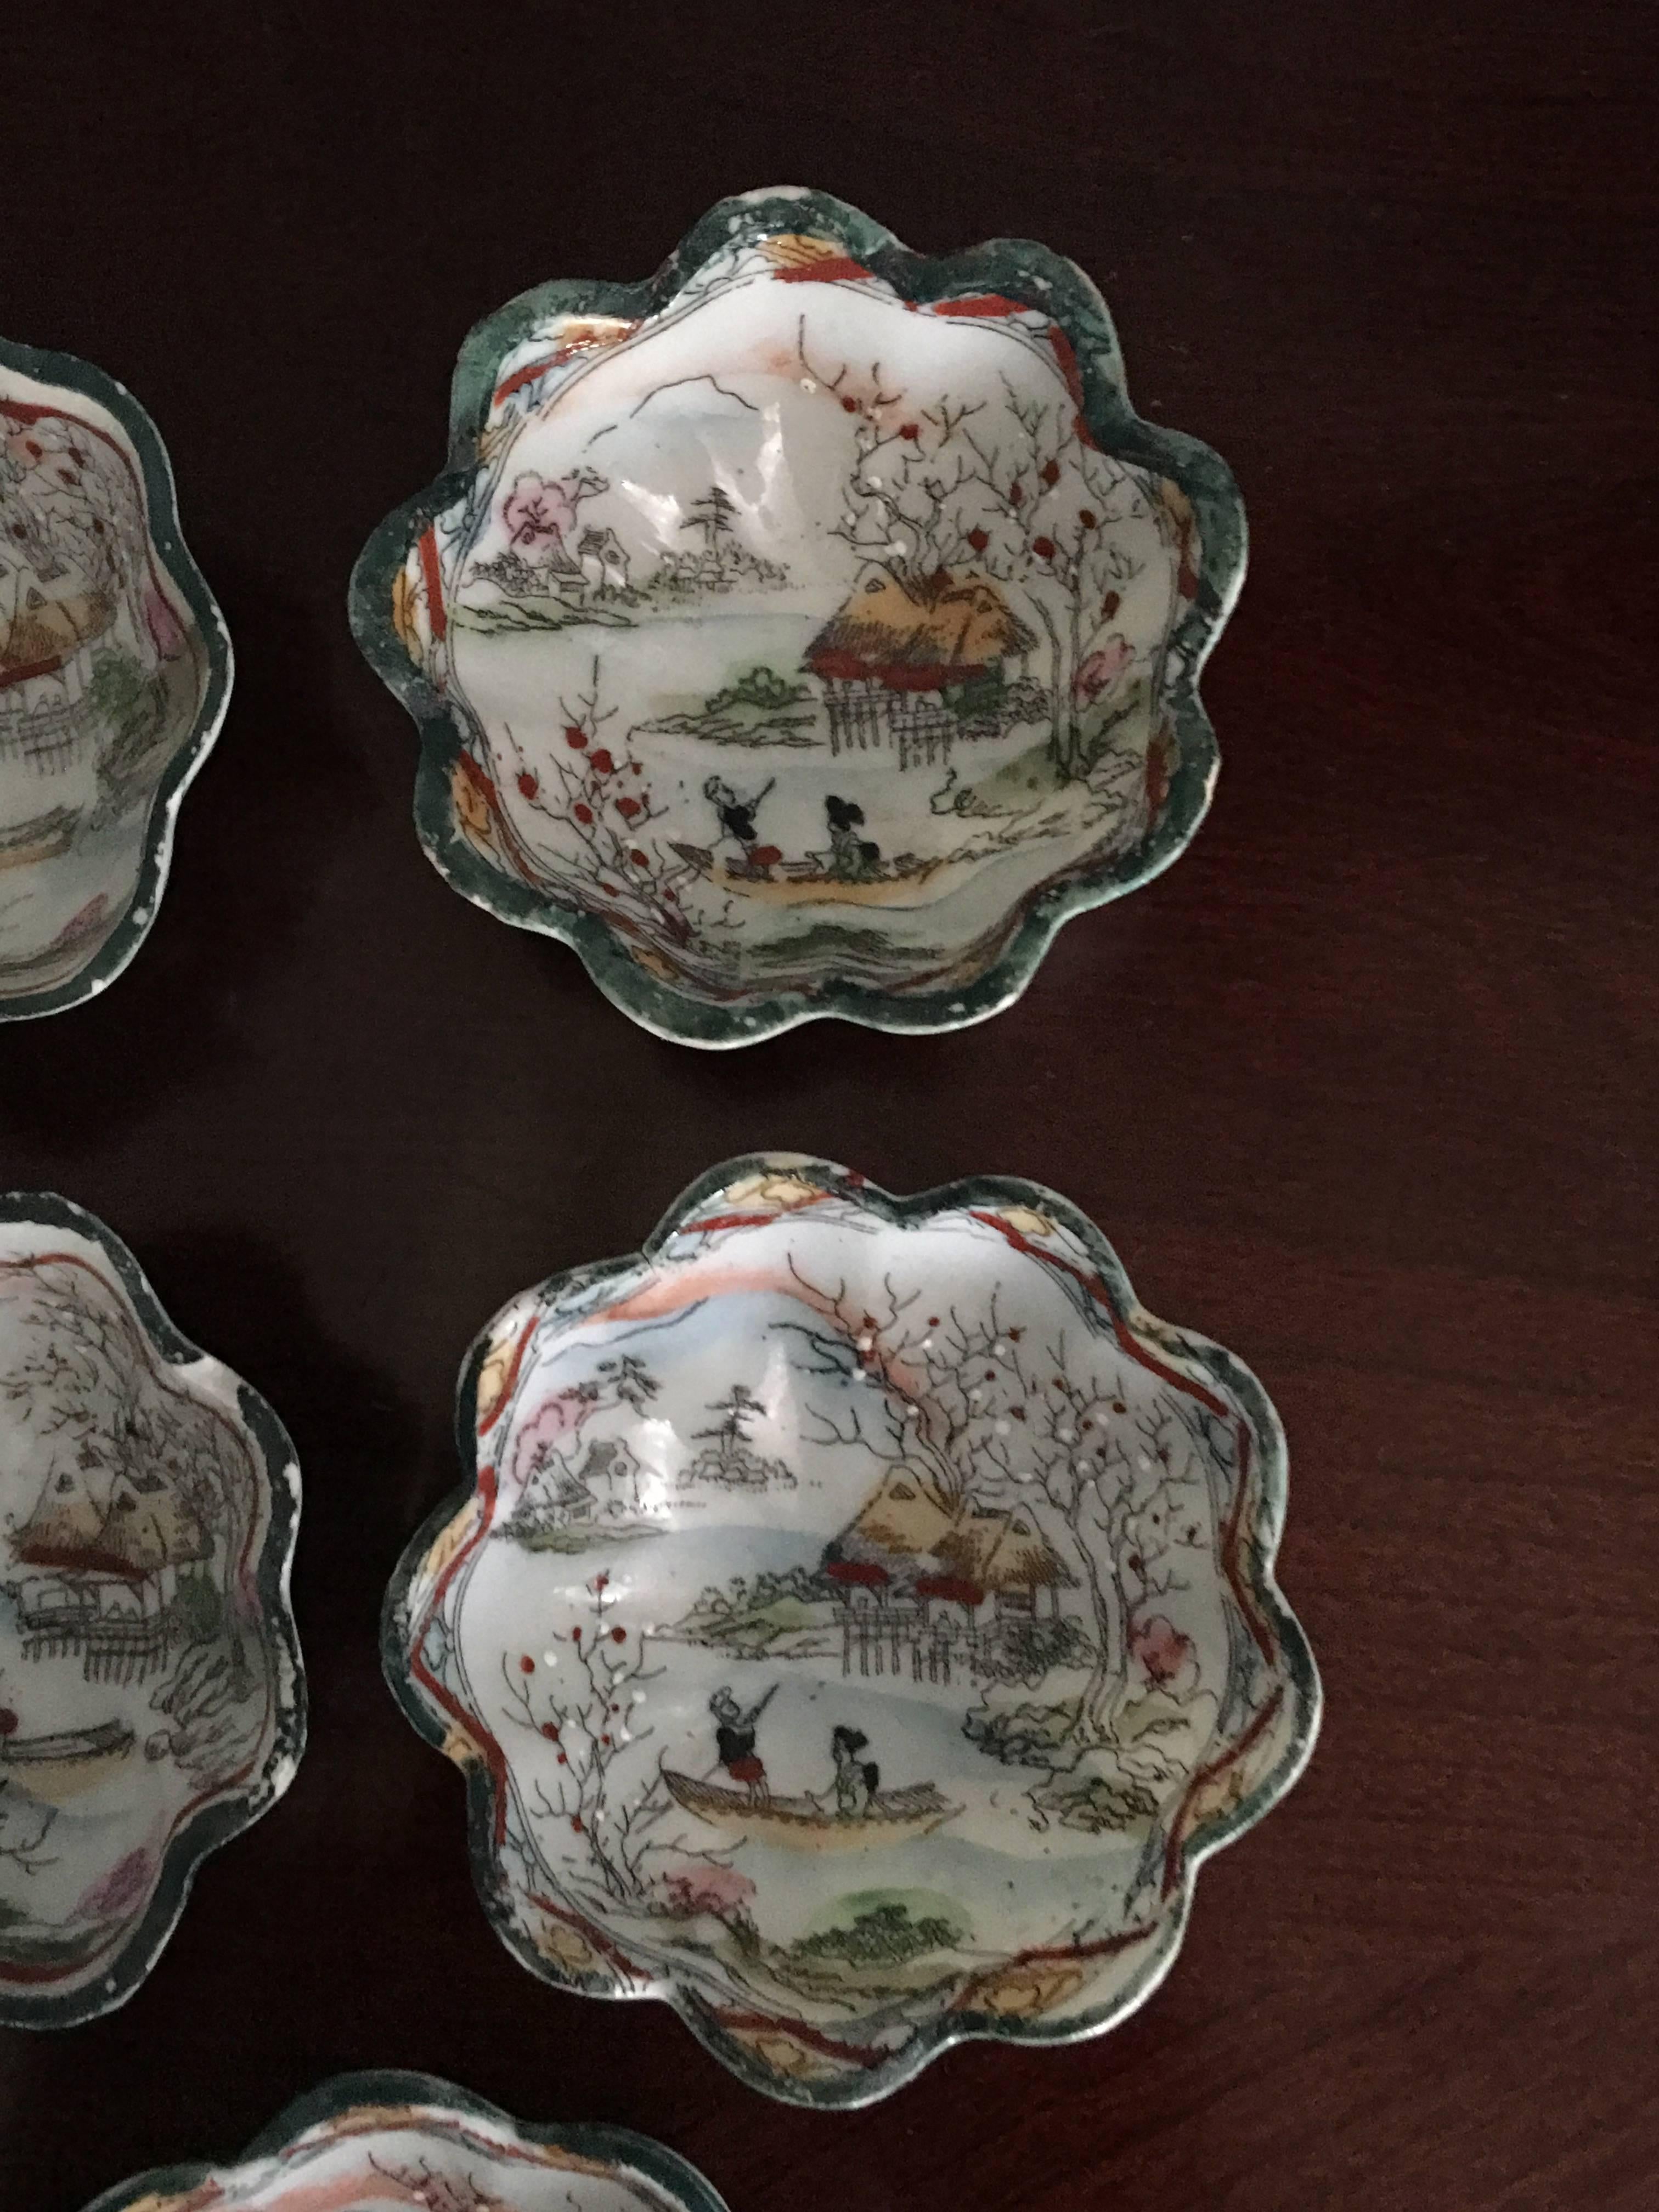 Chinese Export 19th Century Asian Decorative Bowls with Ornate Hand-Painted Design, Set of Five